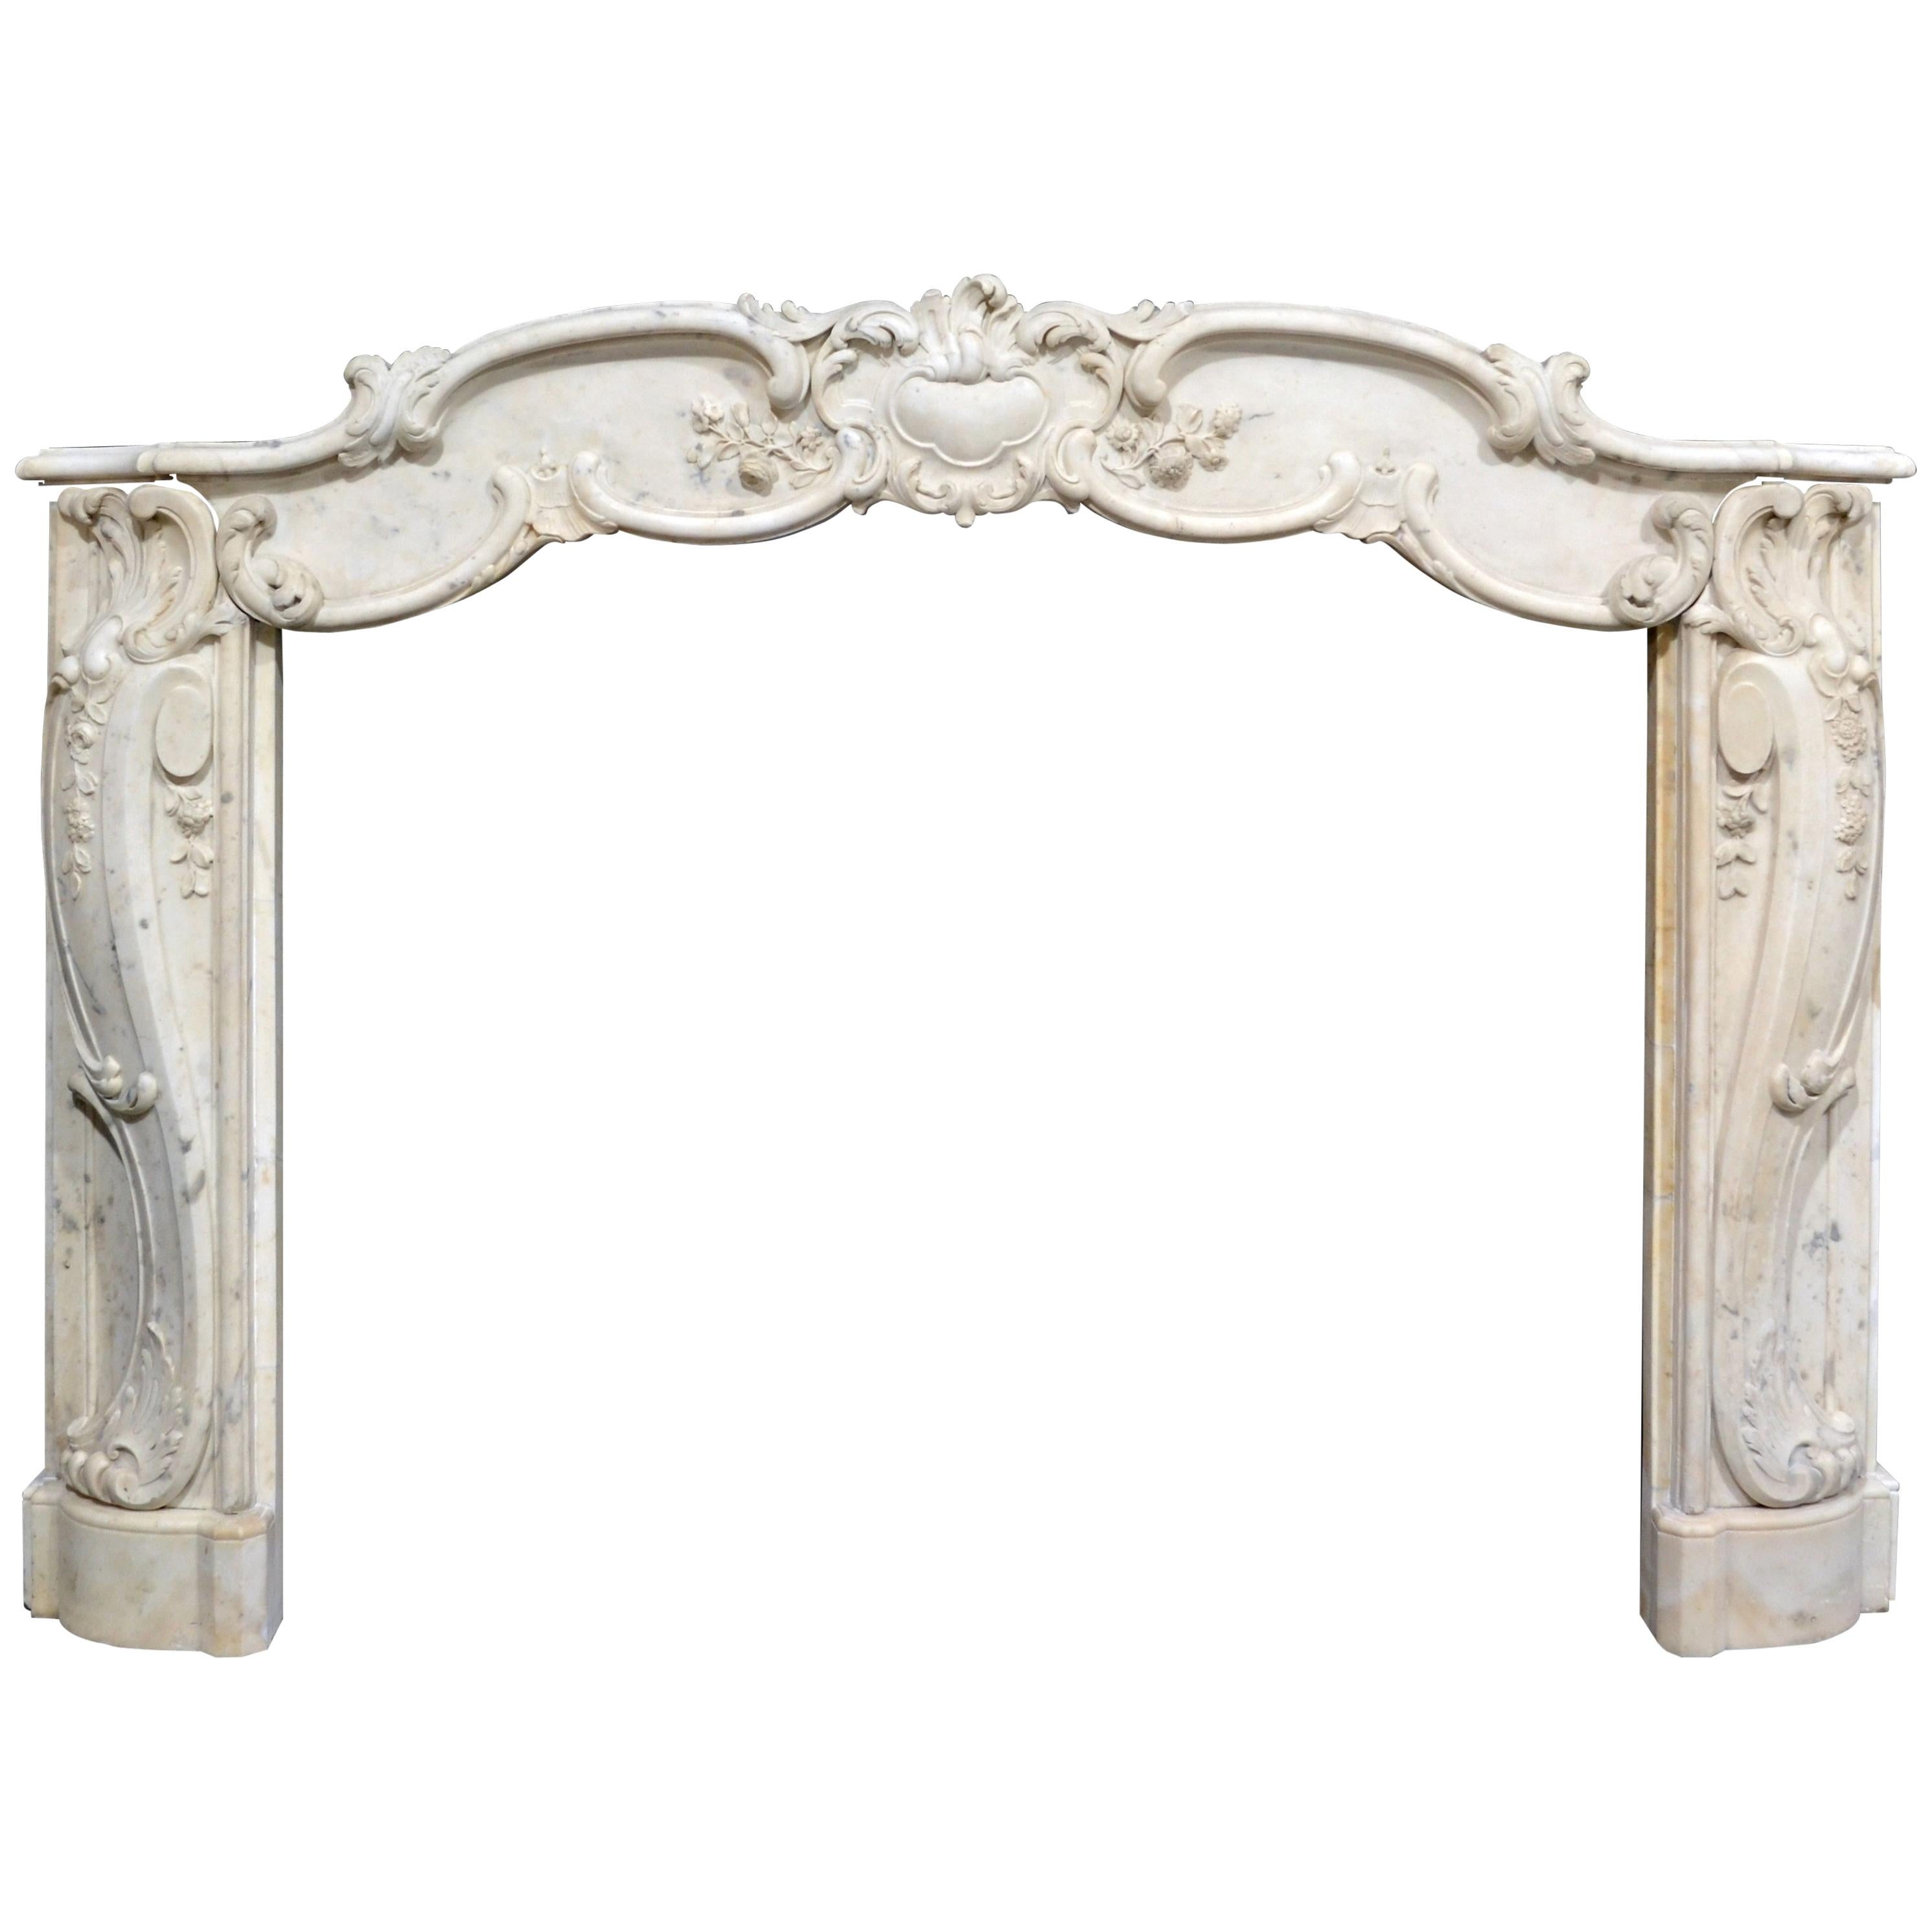 Early 19th Century French Rococo Mantelpiece For Sale